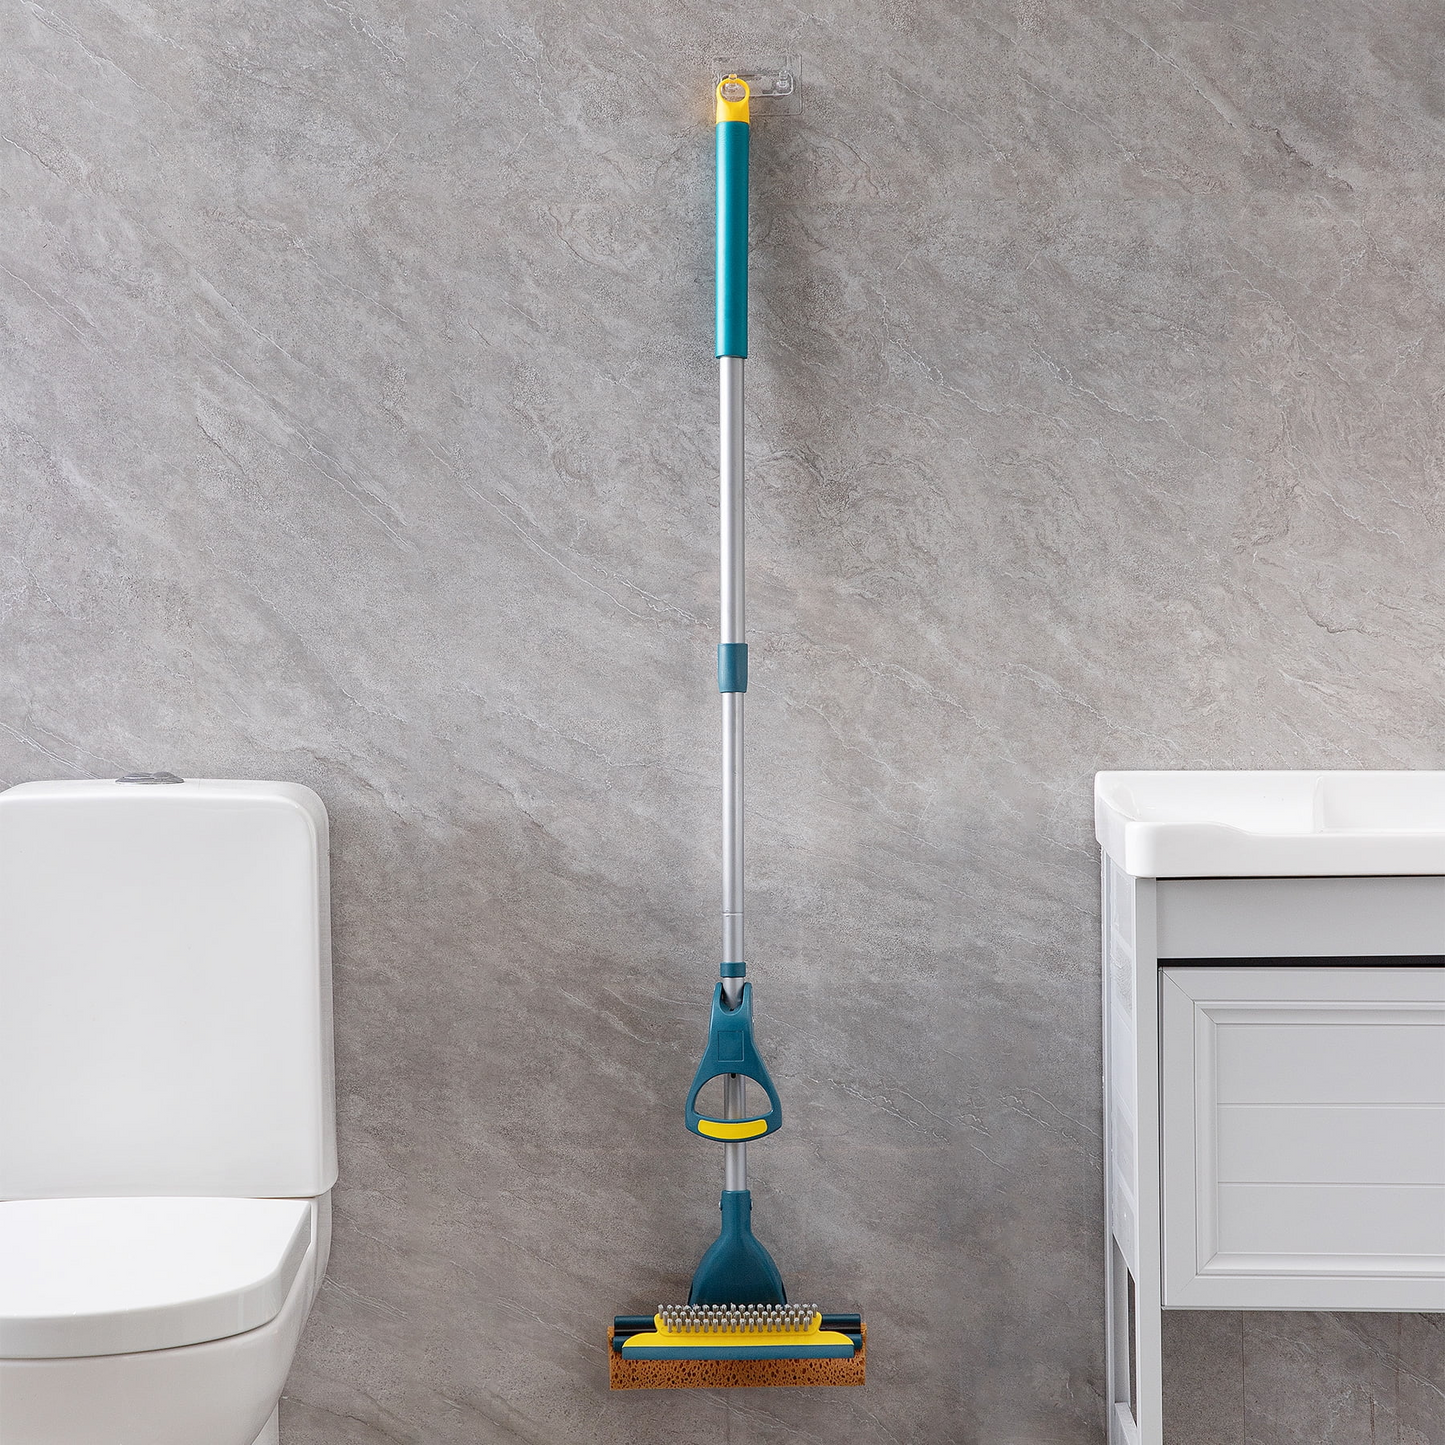 Yocada Sponge Mop Green with Extendable Iron Handle Squeegee Easily Wringing for Floor